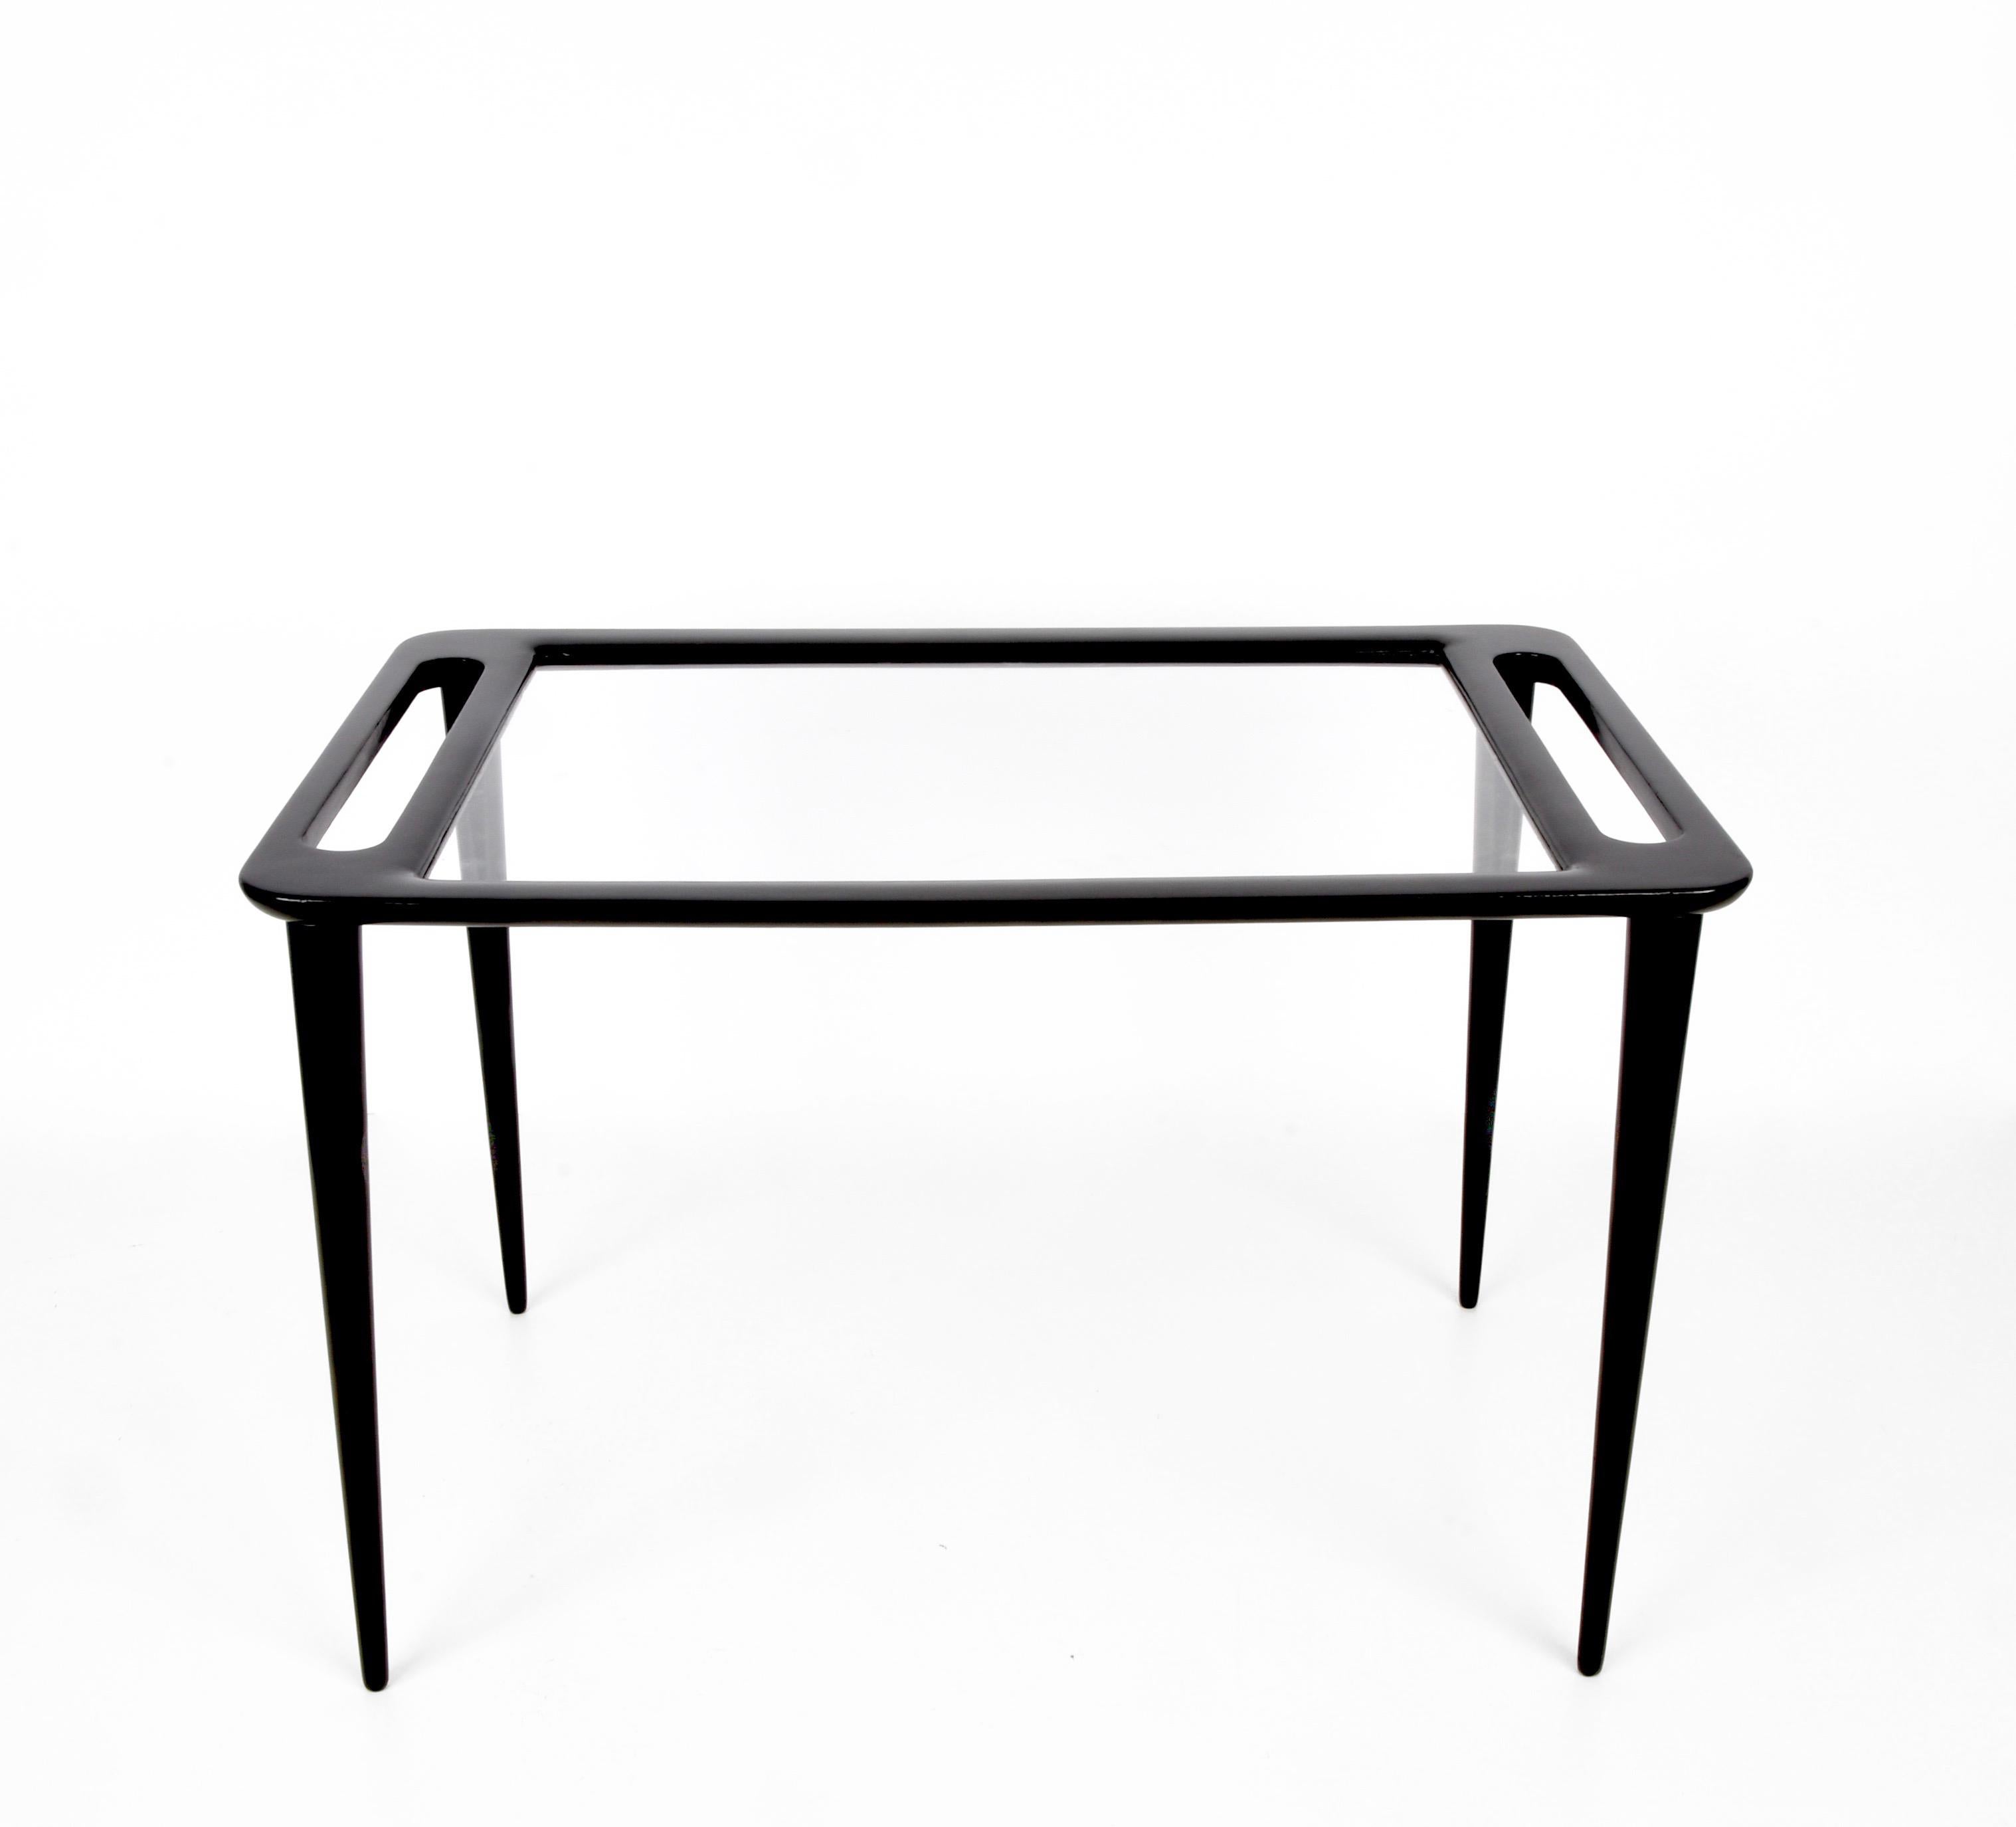 Beautiful midcentury coffee table attributed to Ico Parisi, in ebonized wood with glass top. This fantastic piece was designed in Italy during the 1950s.

This incredible item will hit you with the beautiful lines of the four legs, looking like